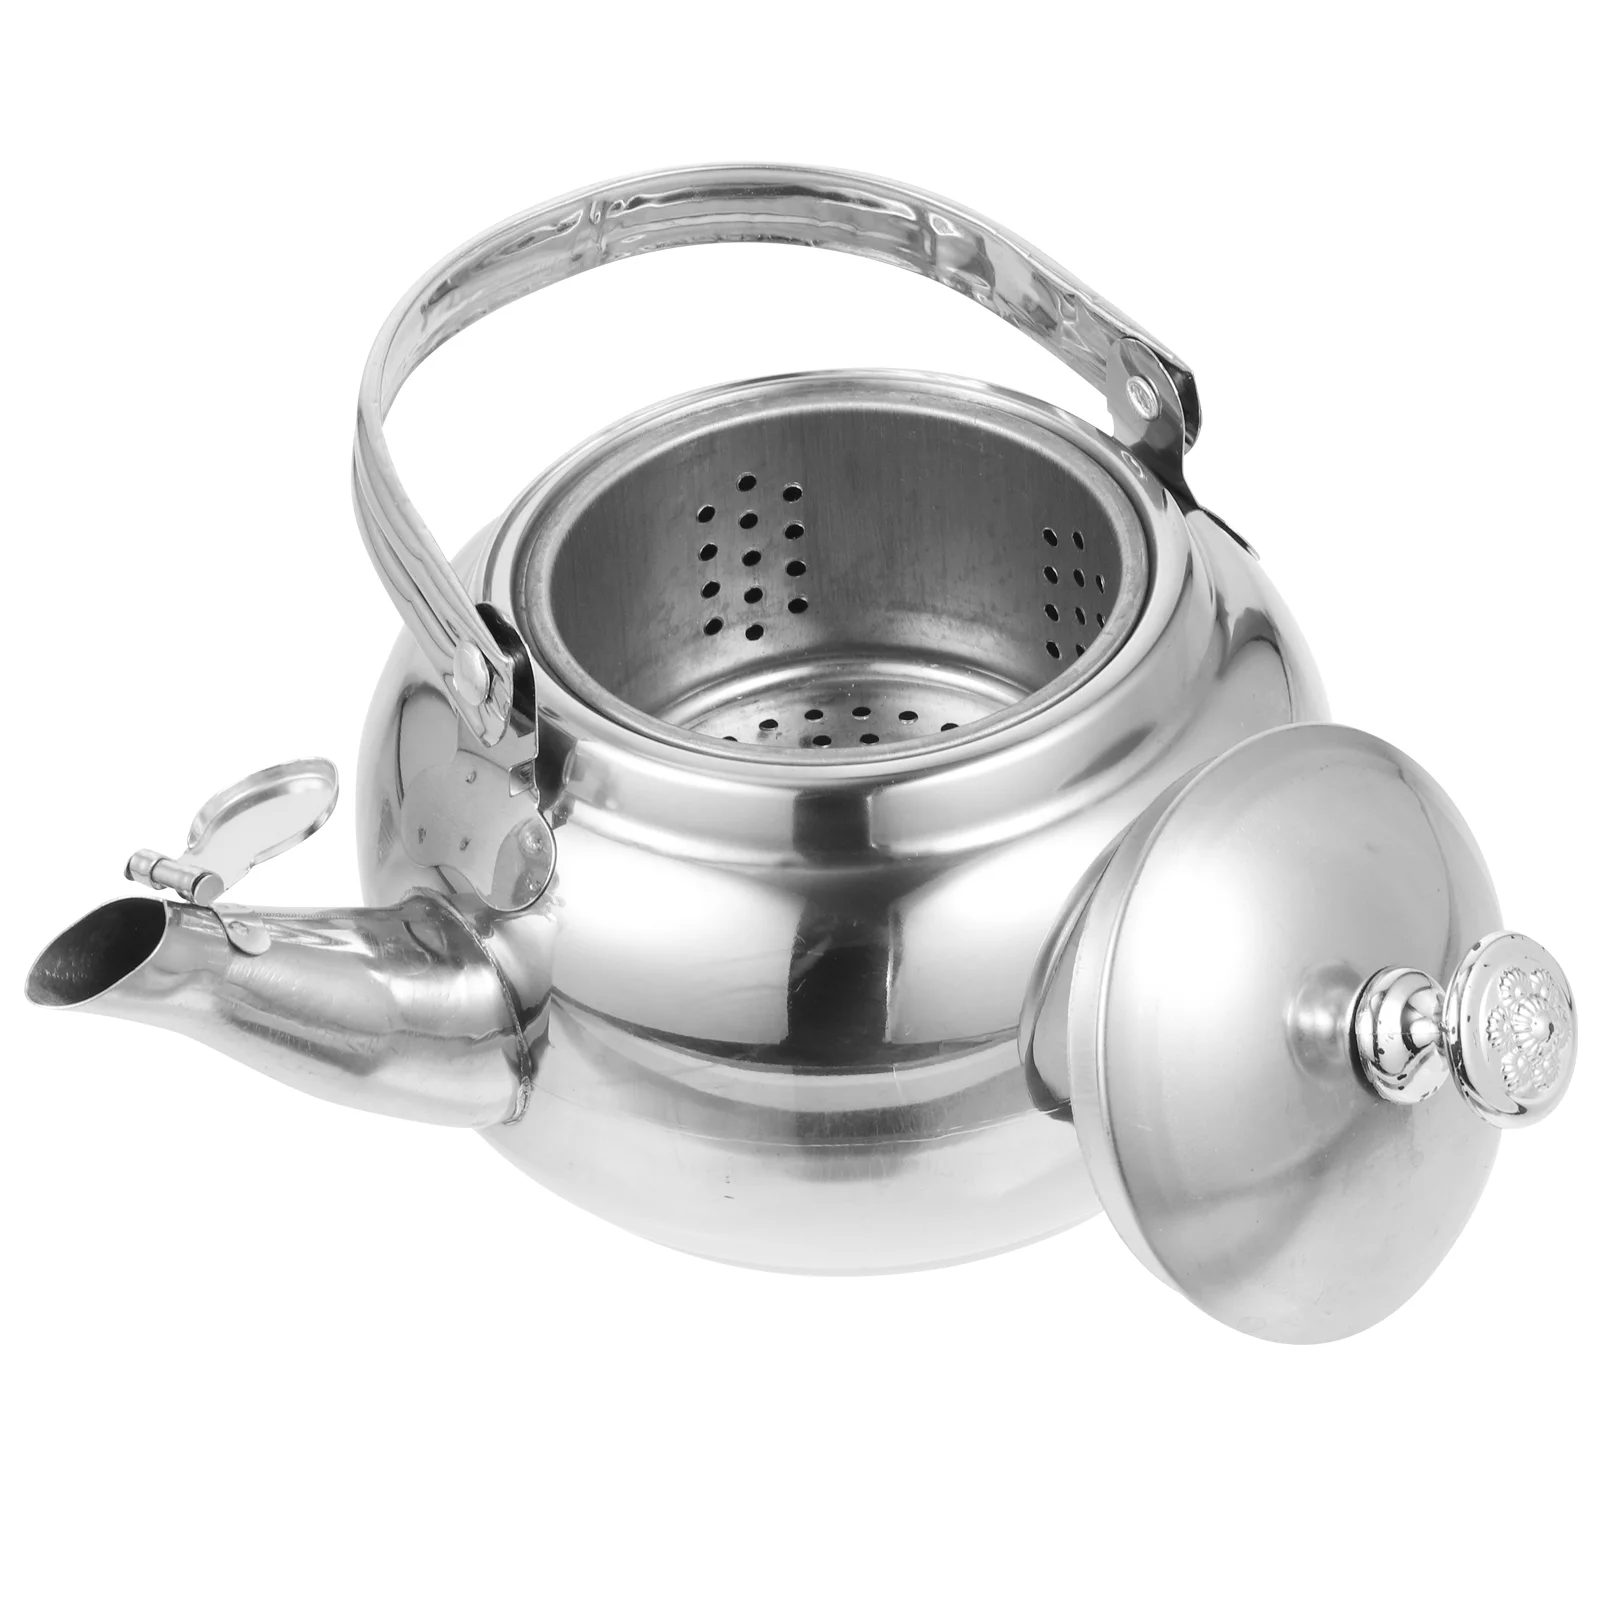 

Whistling Tea Kettle Stainless Steel Water Boiler Induction Stove Gas Stove Top Home